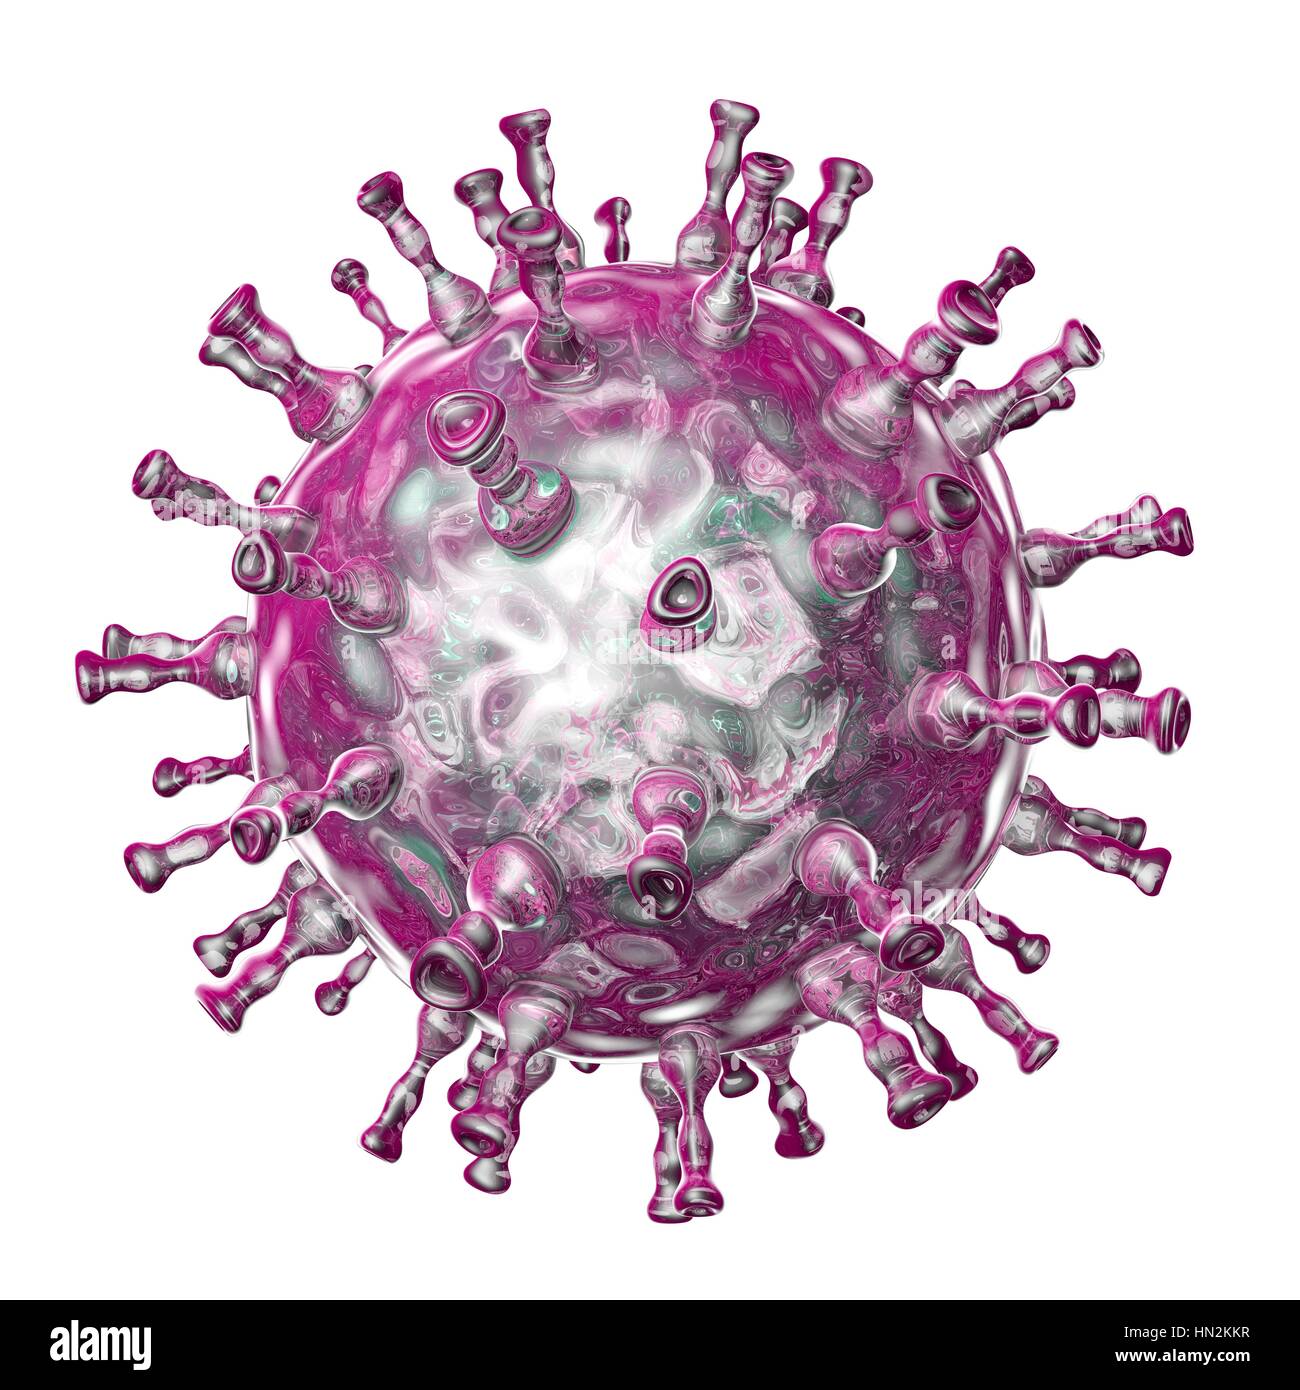 Computer illustration of varicella zoster virus particles, the cause of chickenpox and shingles. Varicella zoster virus is also known as human herpes virus type 3 (HHV-3). Stock Photo